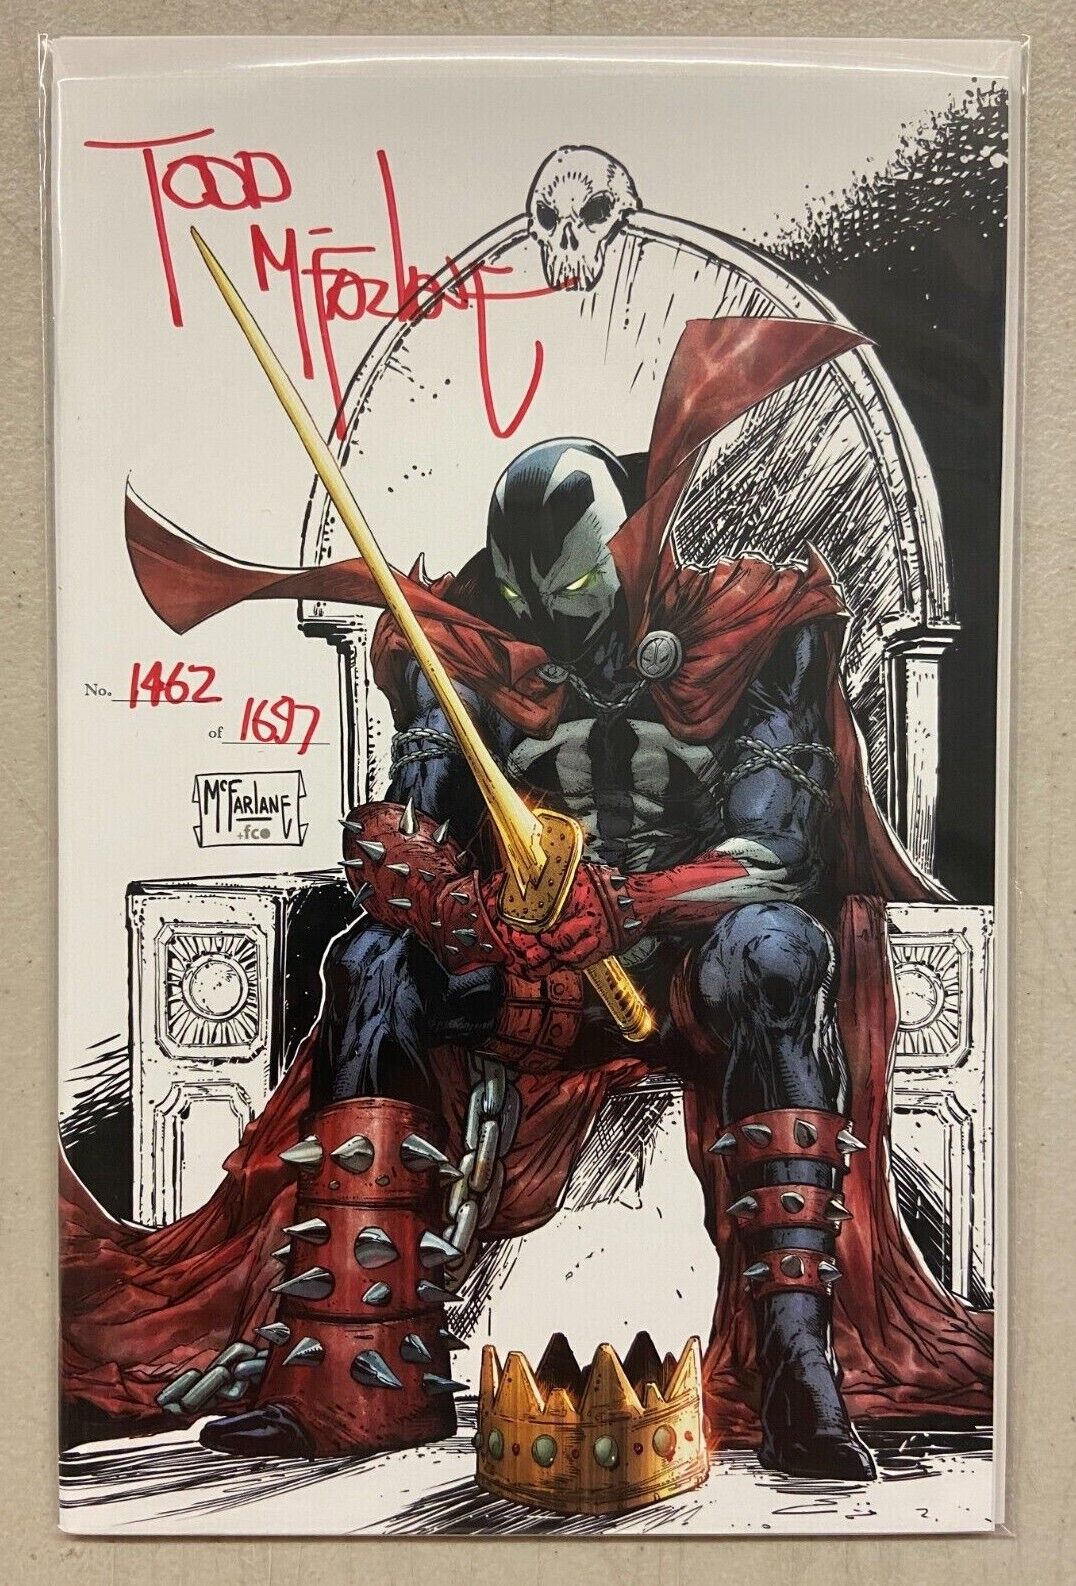 KING SPAWN #1 Autographed Signed by Todd McFarlane CGC COA #1462 of 1697